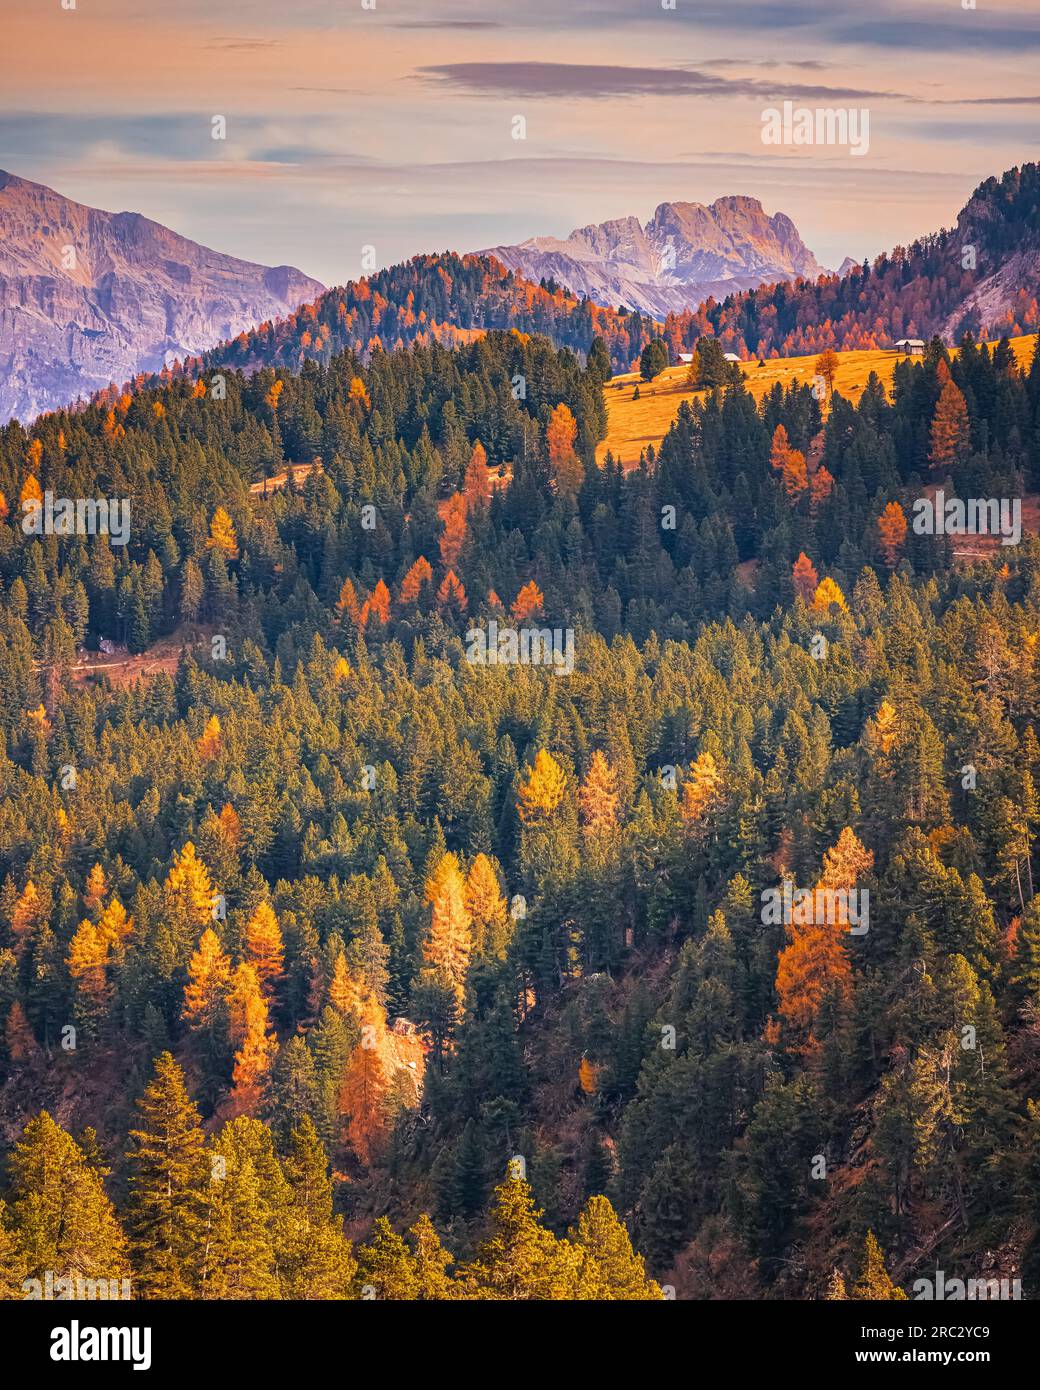 At 2000 meters altitude, the view on the Passo delle Erbe (Würzjoch Alpine Pass), surrounded by forests and lush autumn colors is breathtaking. The pa Stock Photo